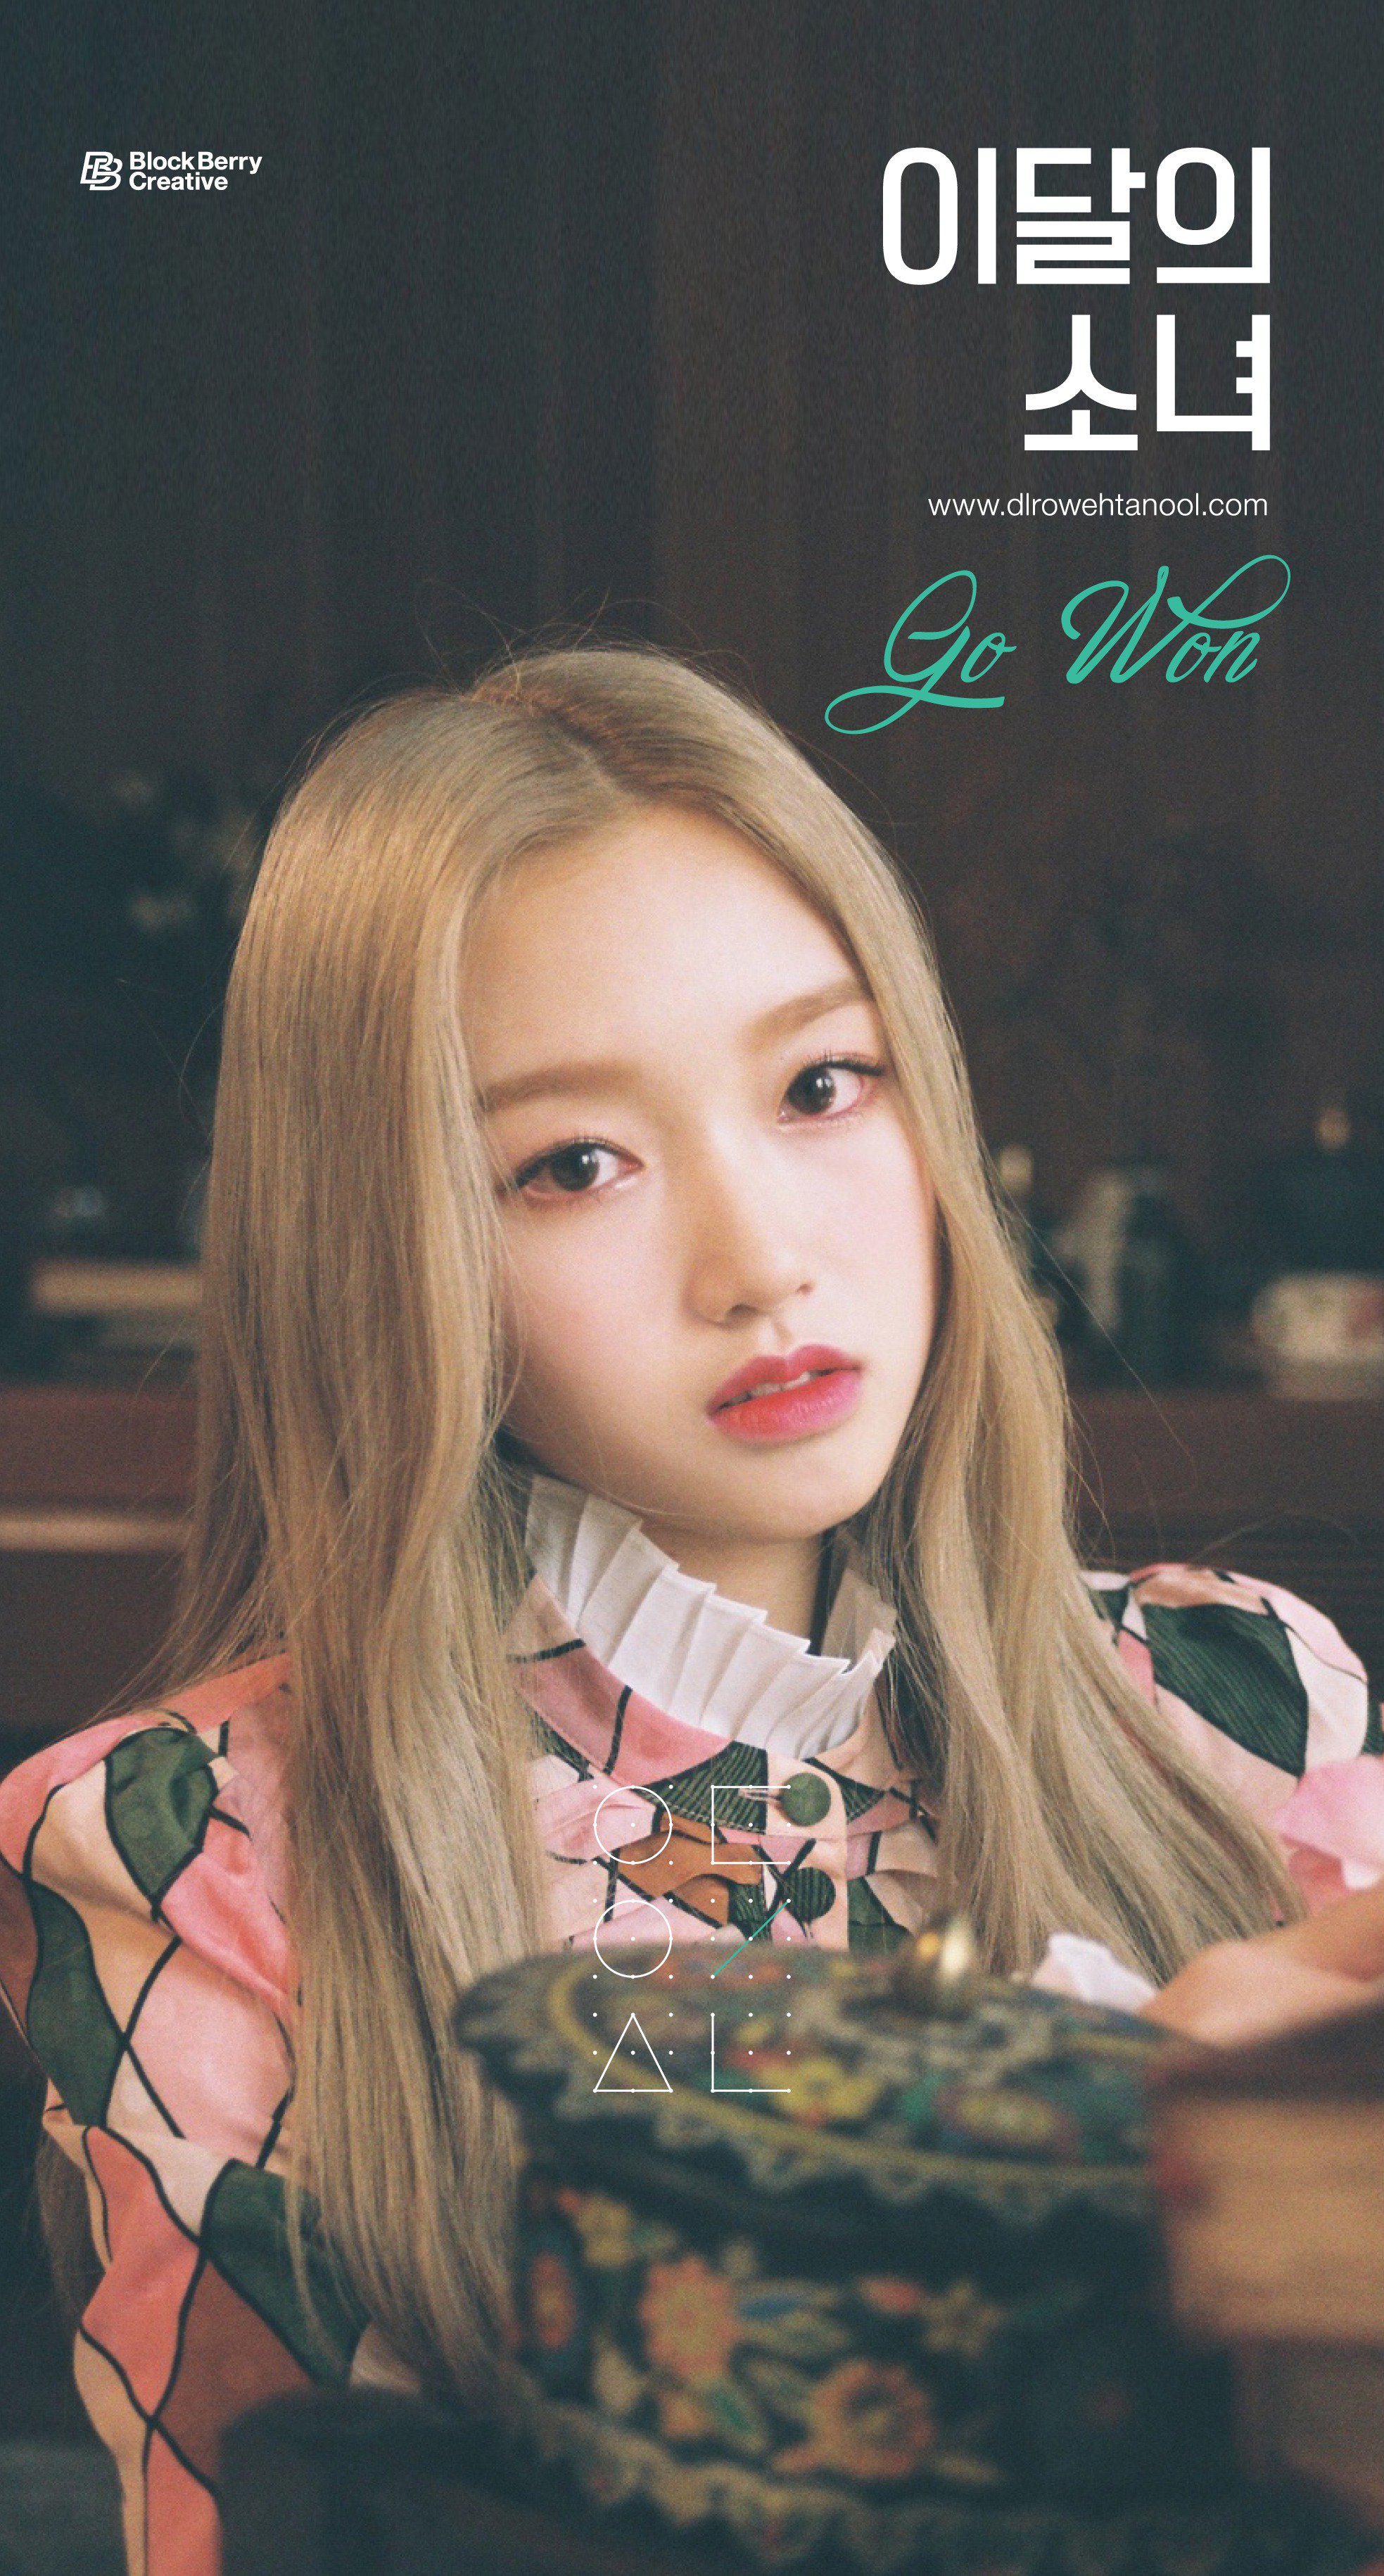 LOONA Shares Another Concept Photo For Go Won